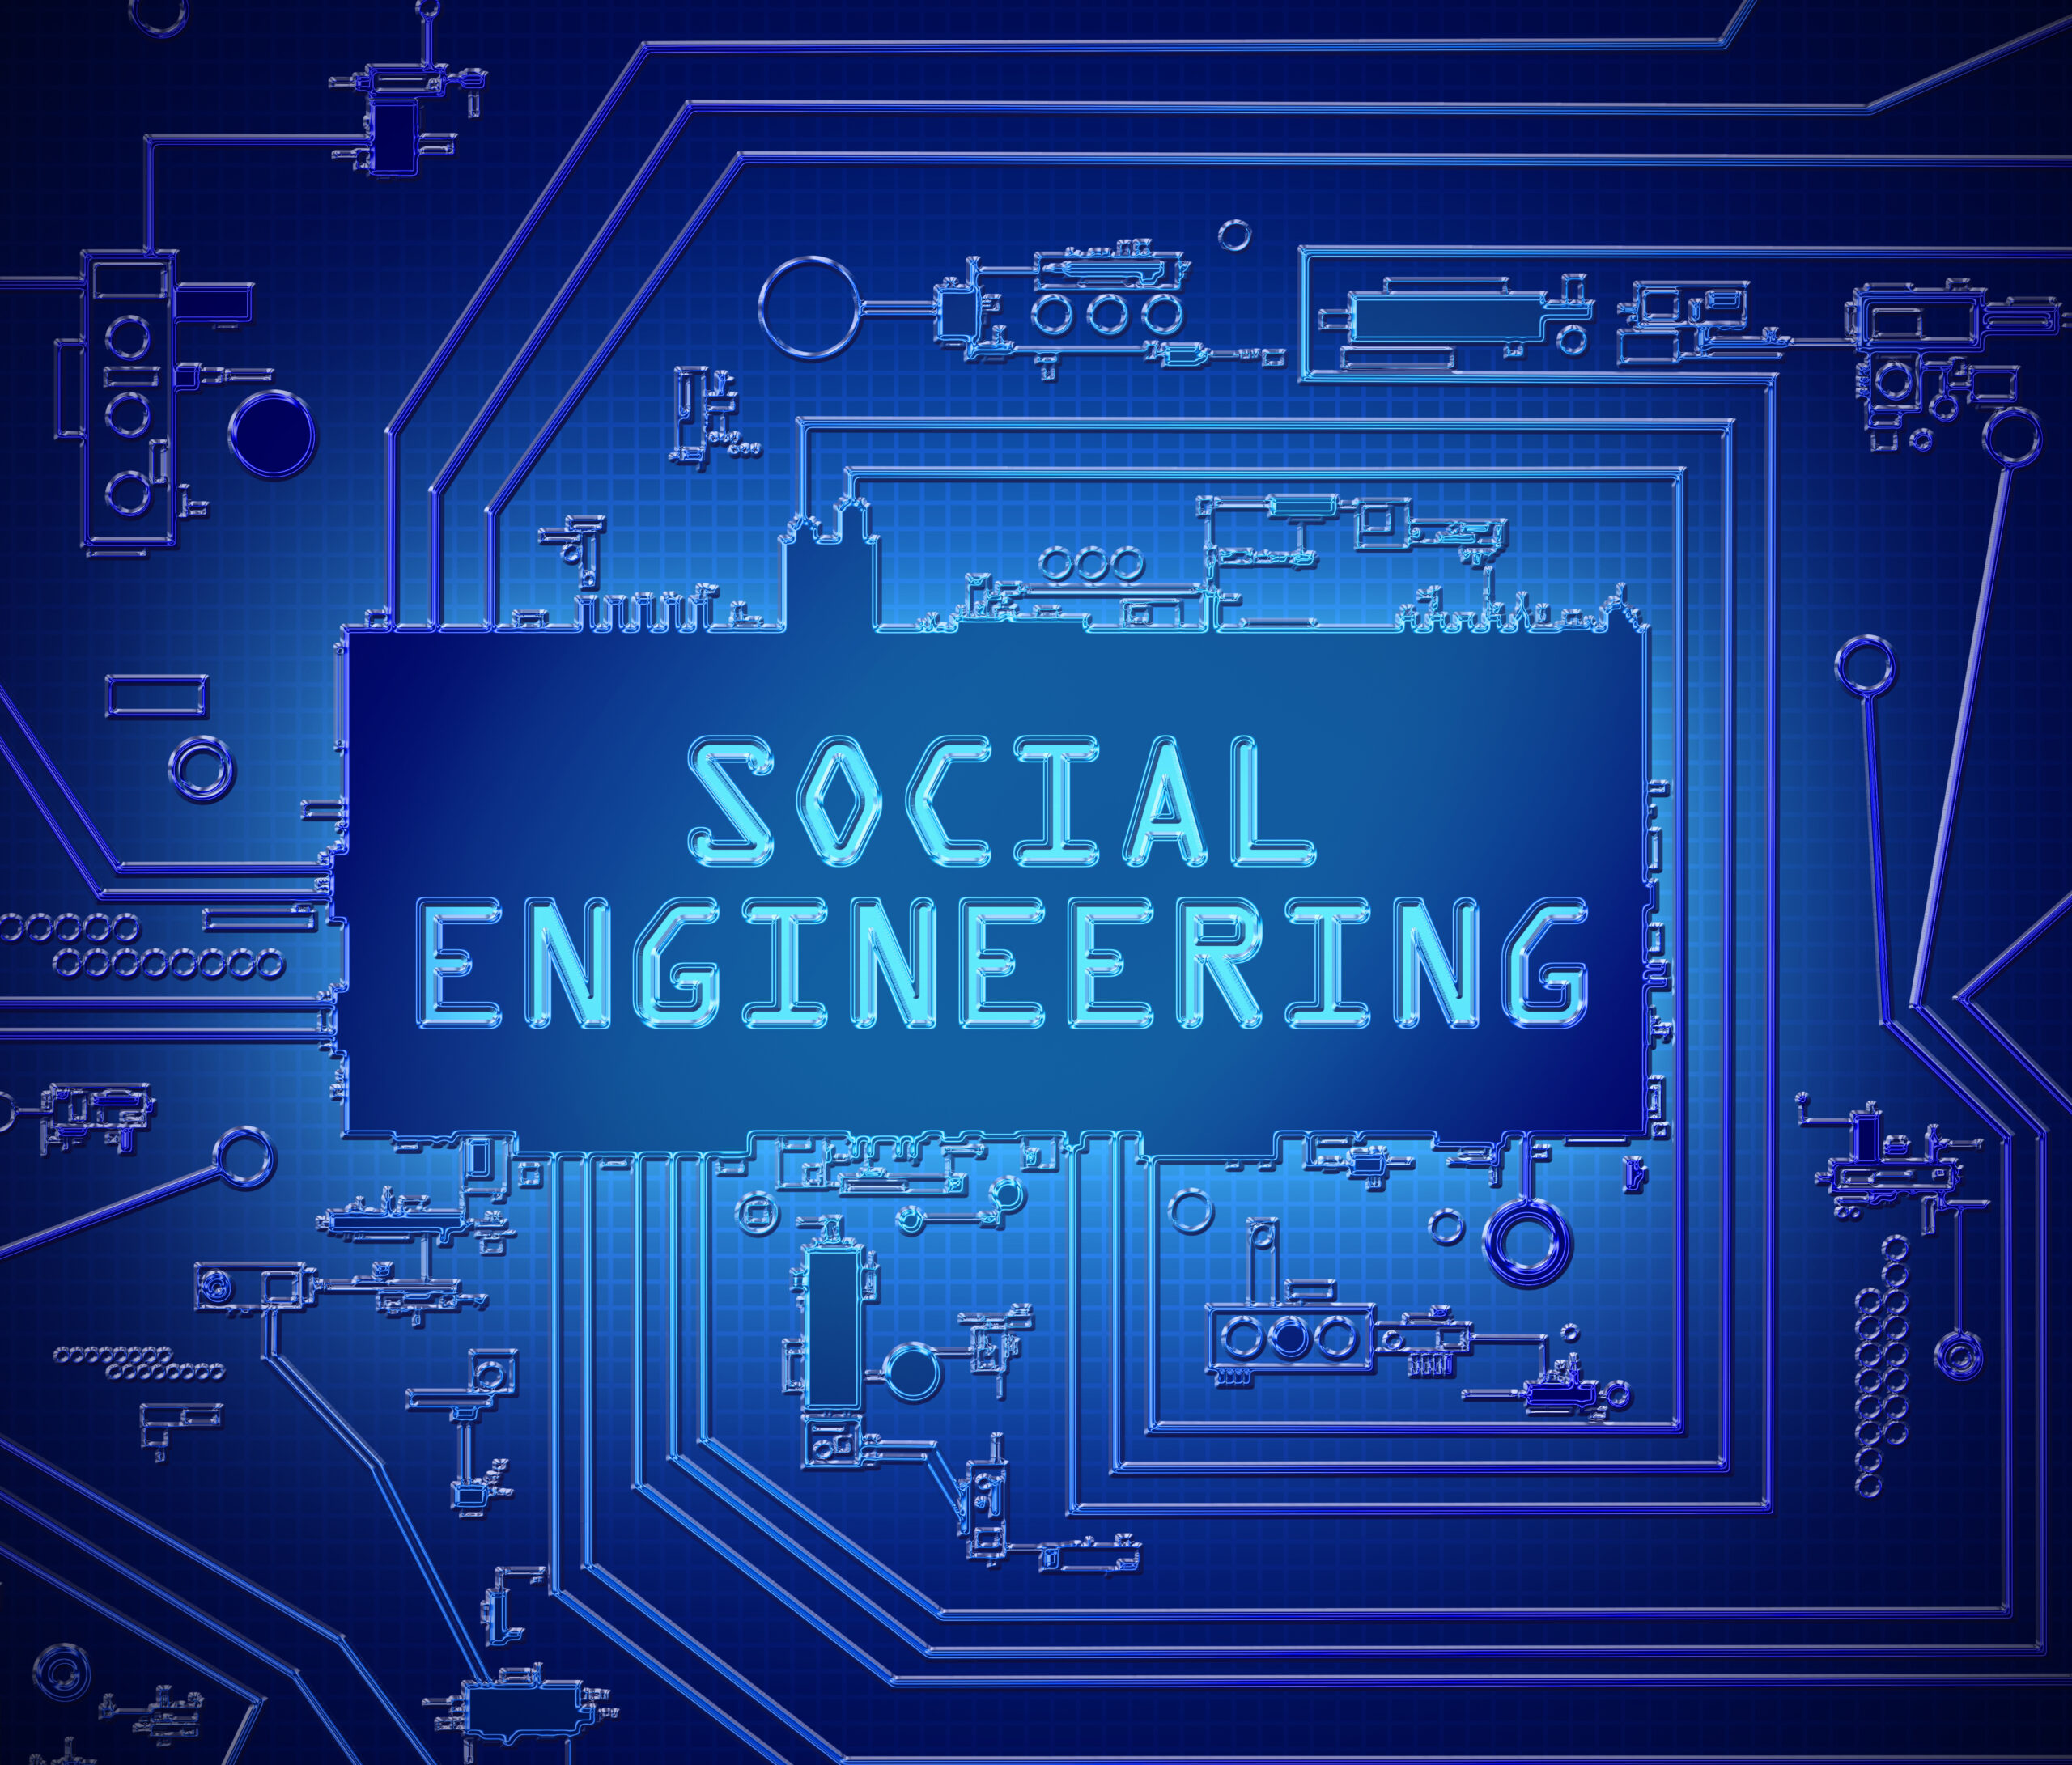 Cool Off With Quick Social Engineering Refresher featured image